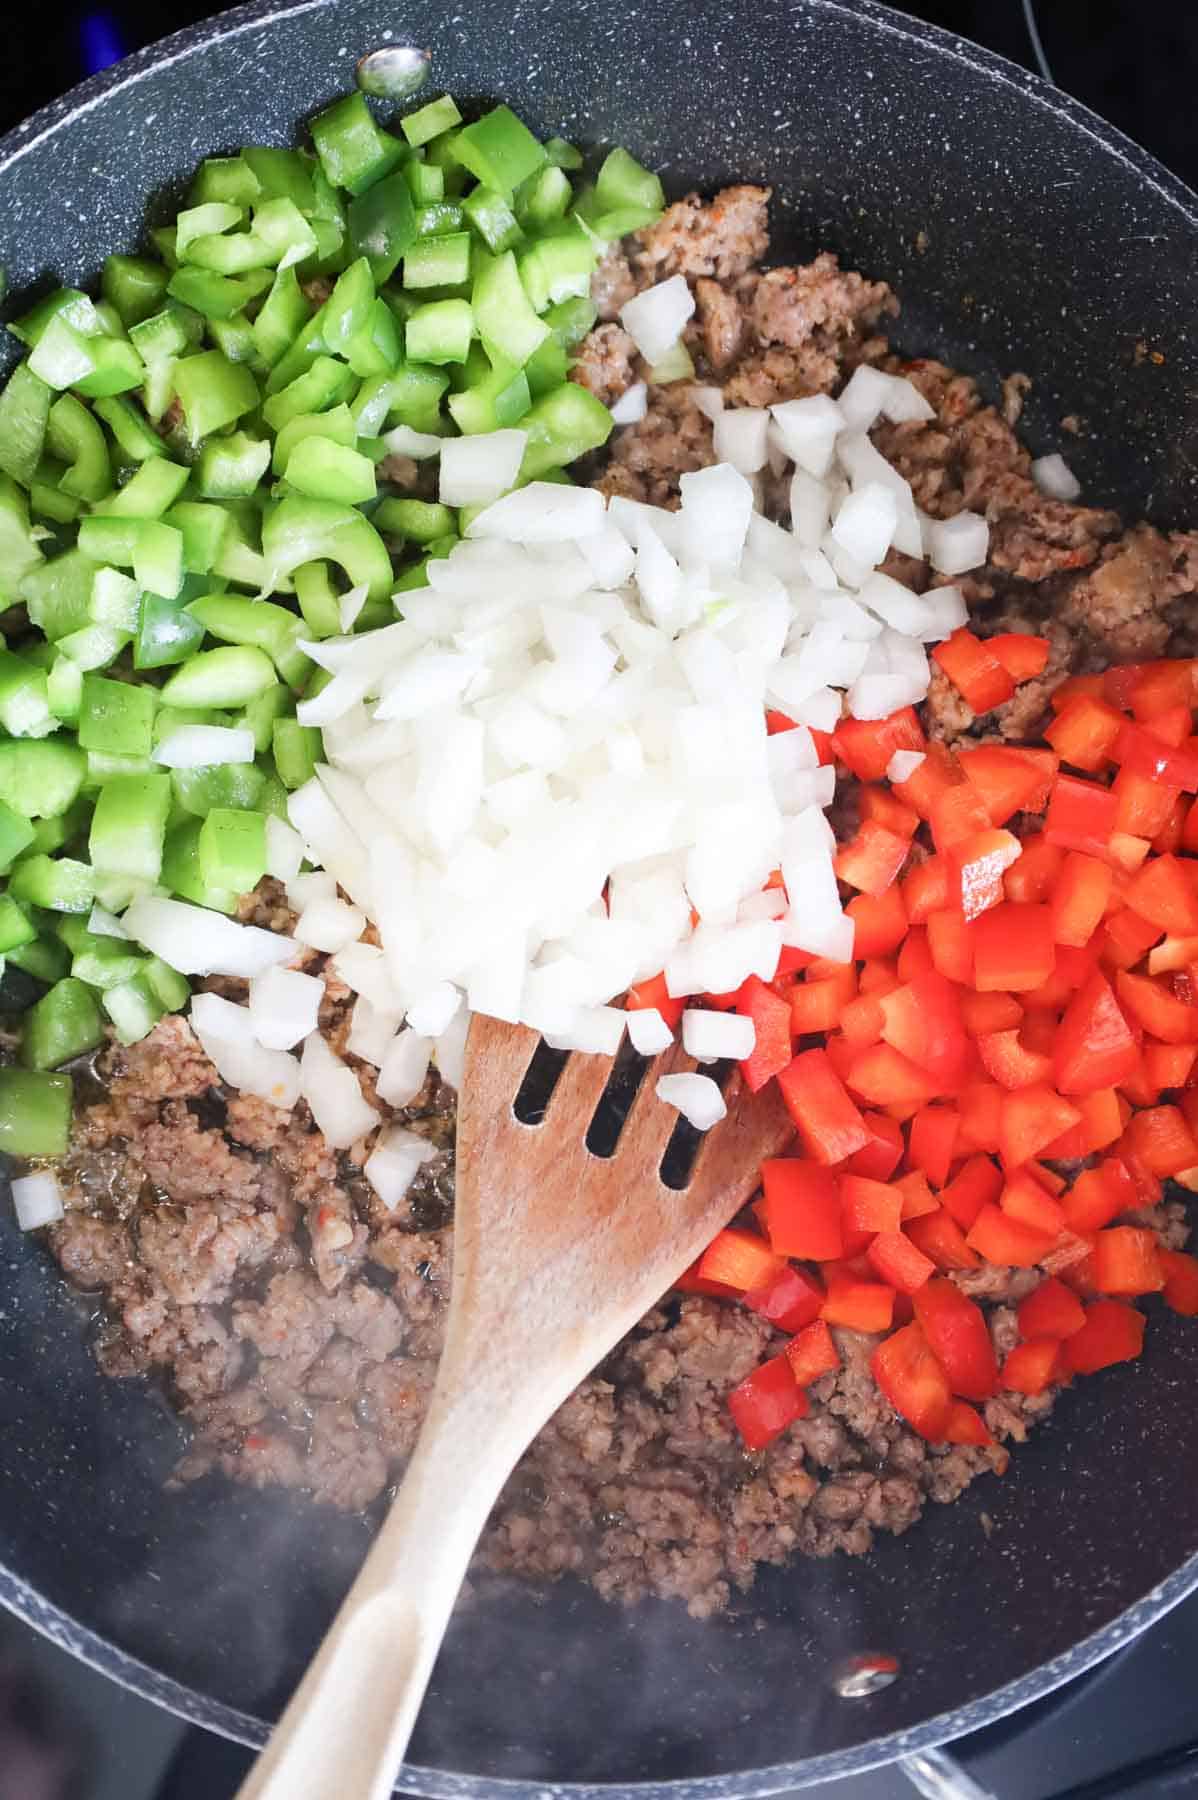 diced green peppers, red peppers and onions on top of crumbled sausage meat in a skillet